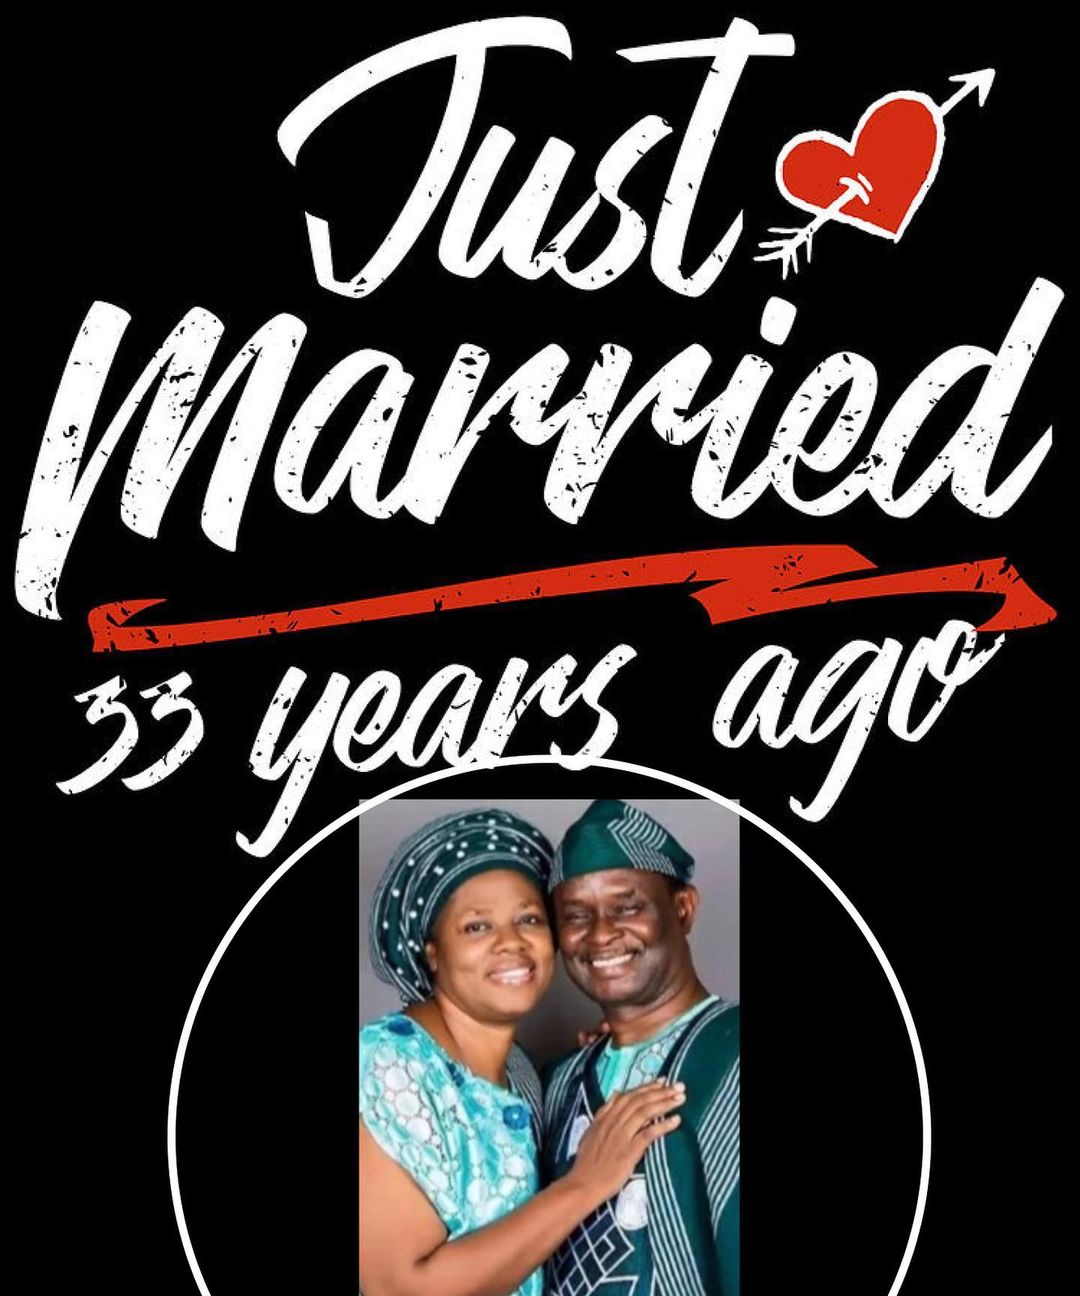 Actor, Mike Bamiloye and wife celebrate 33rd wedding anniversary with touching note